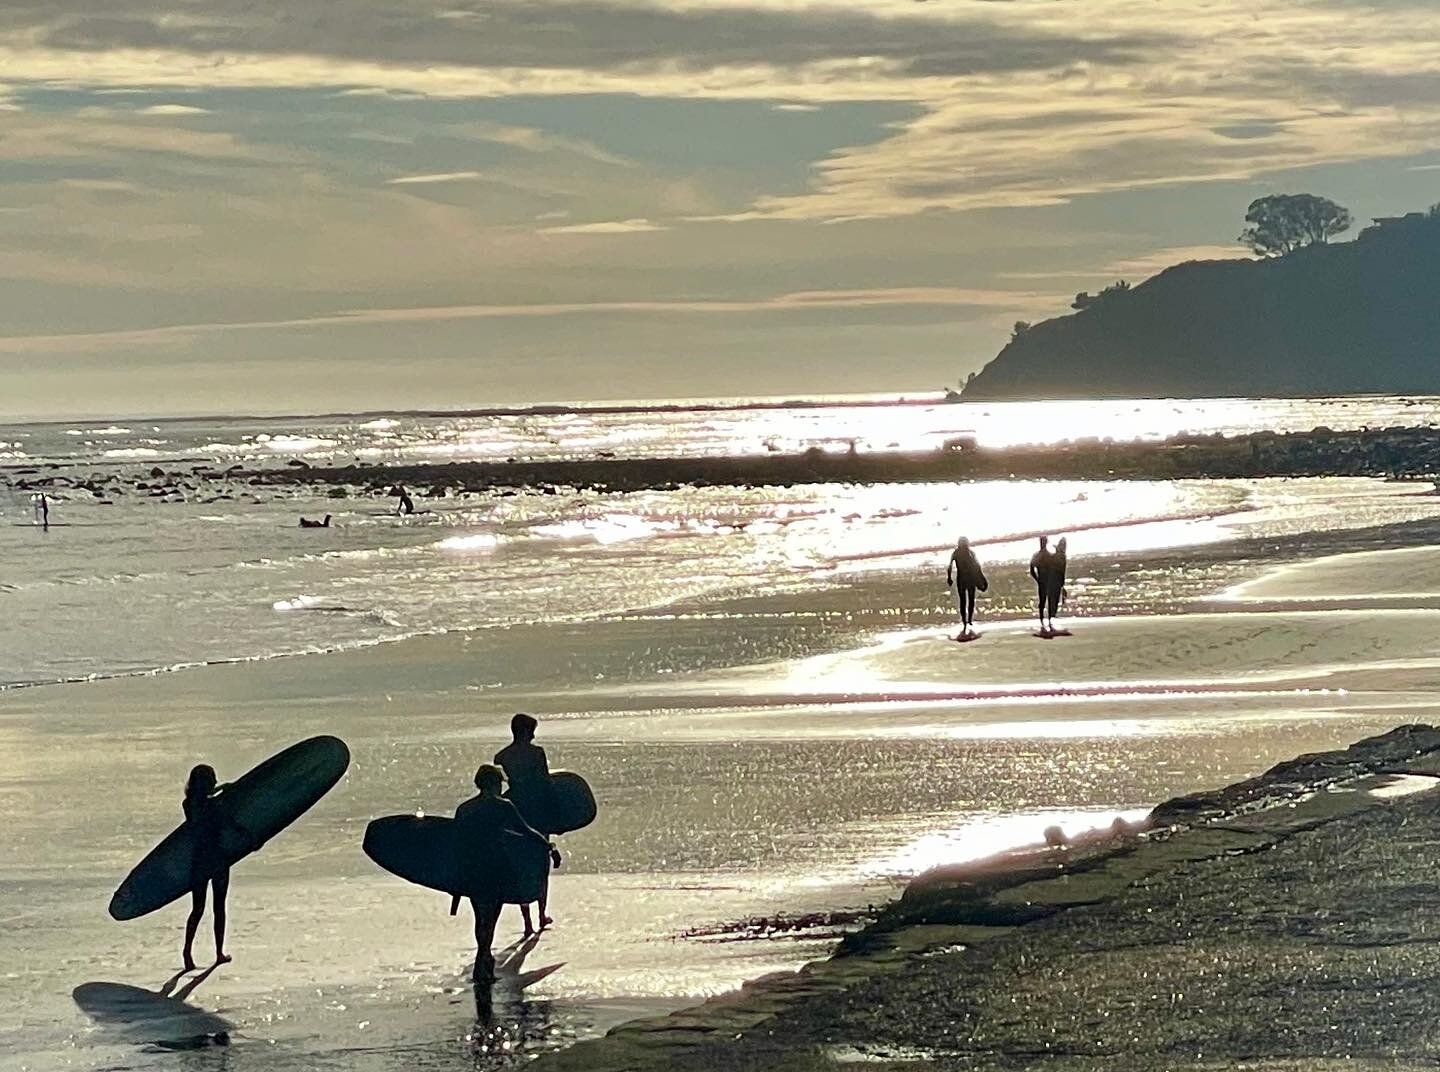 First surf since September. The pandemic had sapped my stoke but I realize that for my own well-being, I need to get back in the ocean and put at bay, at least for an hour or two, the existential angst of the pandemic, climate change and democratic d